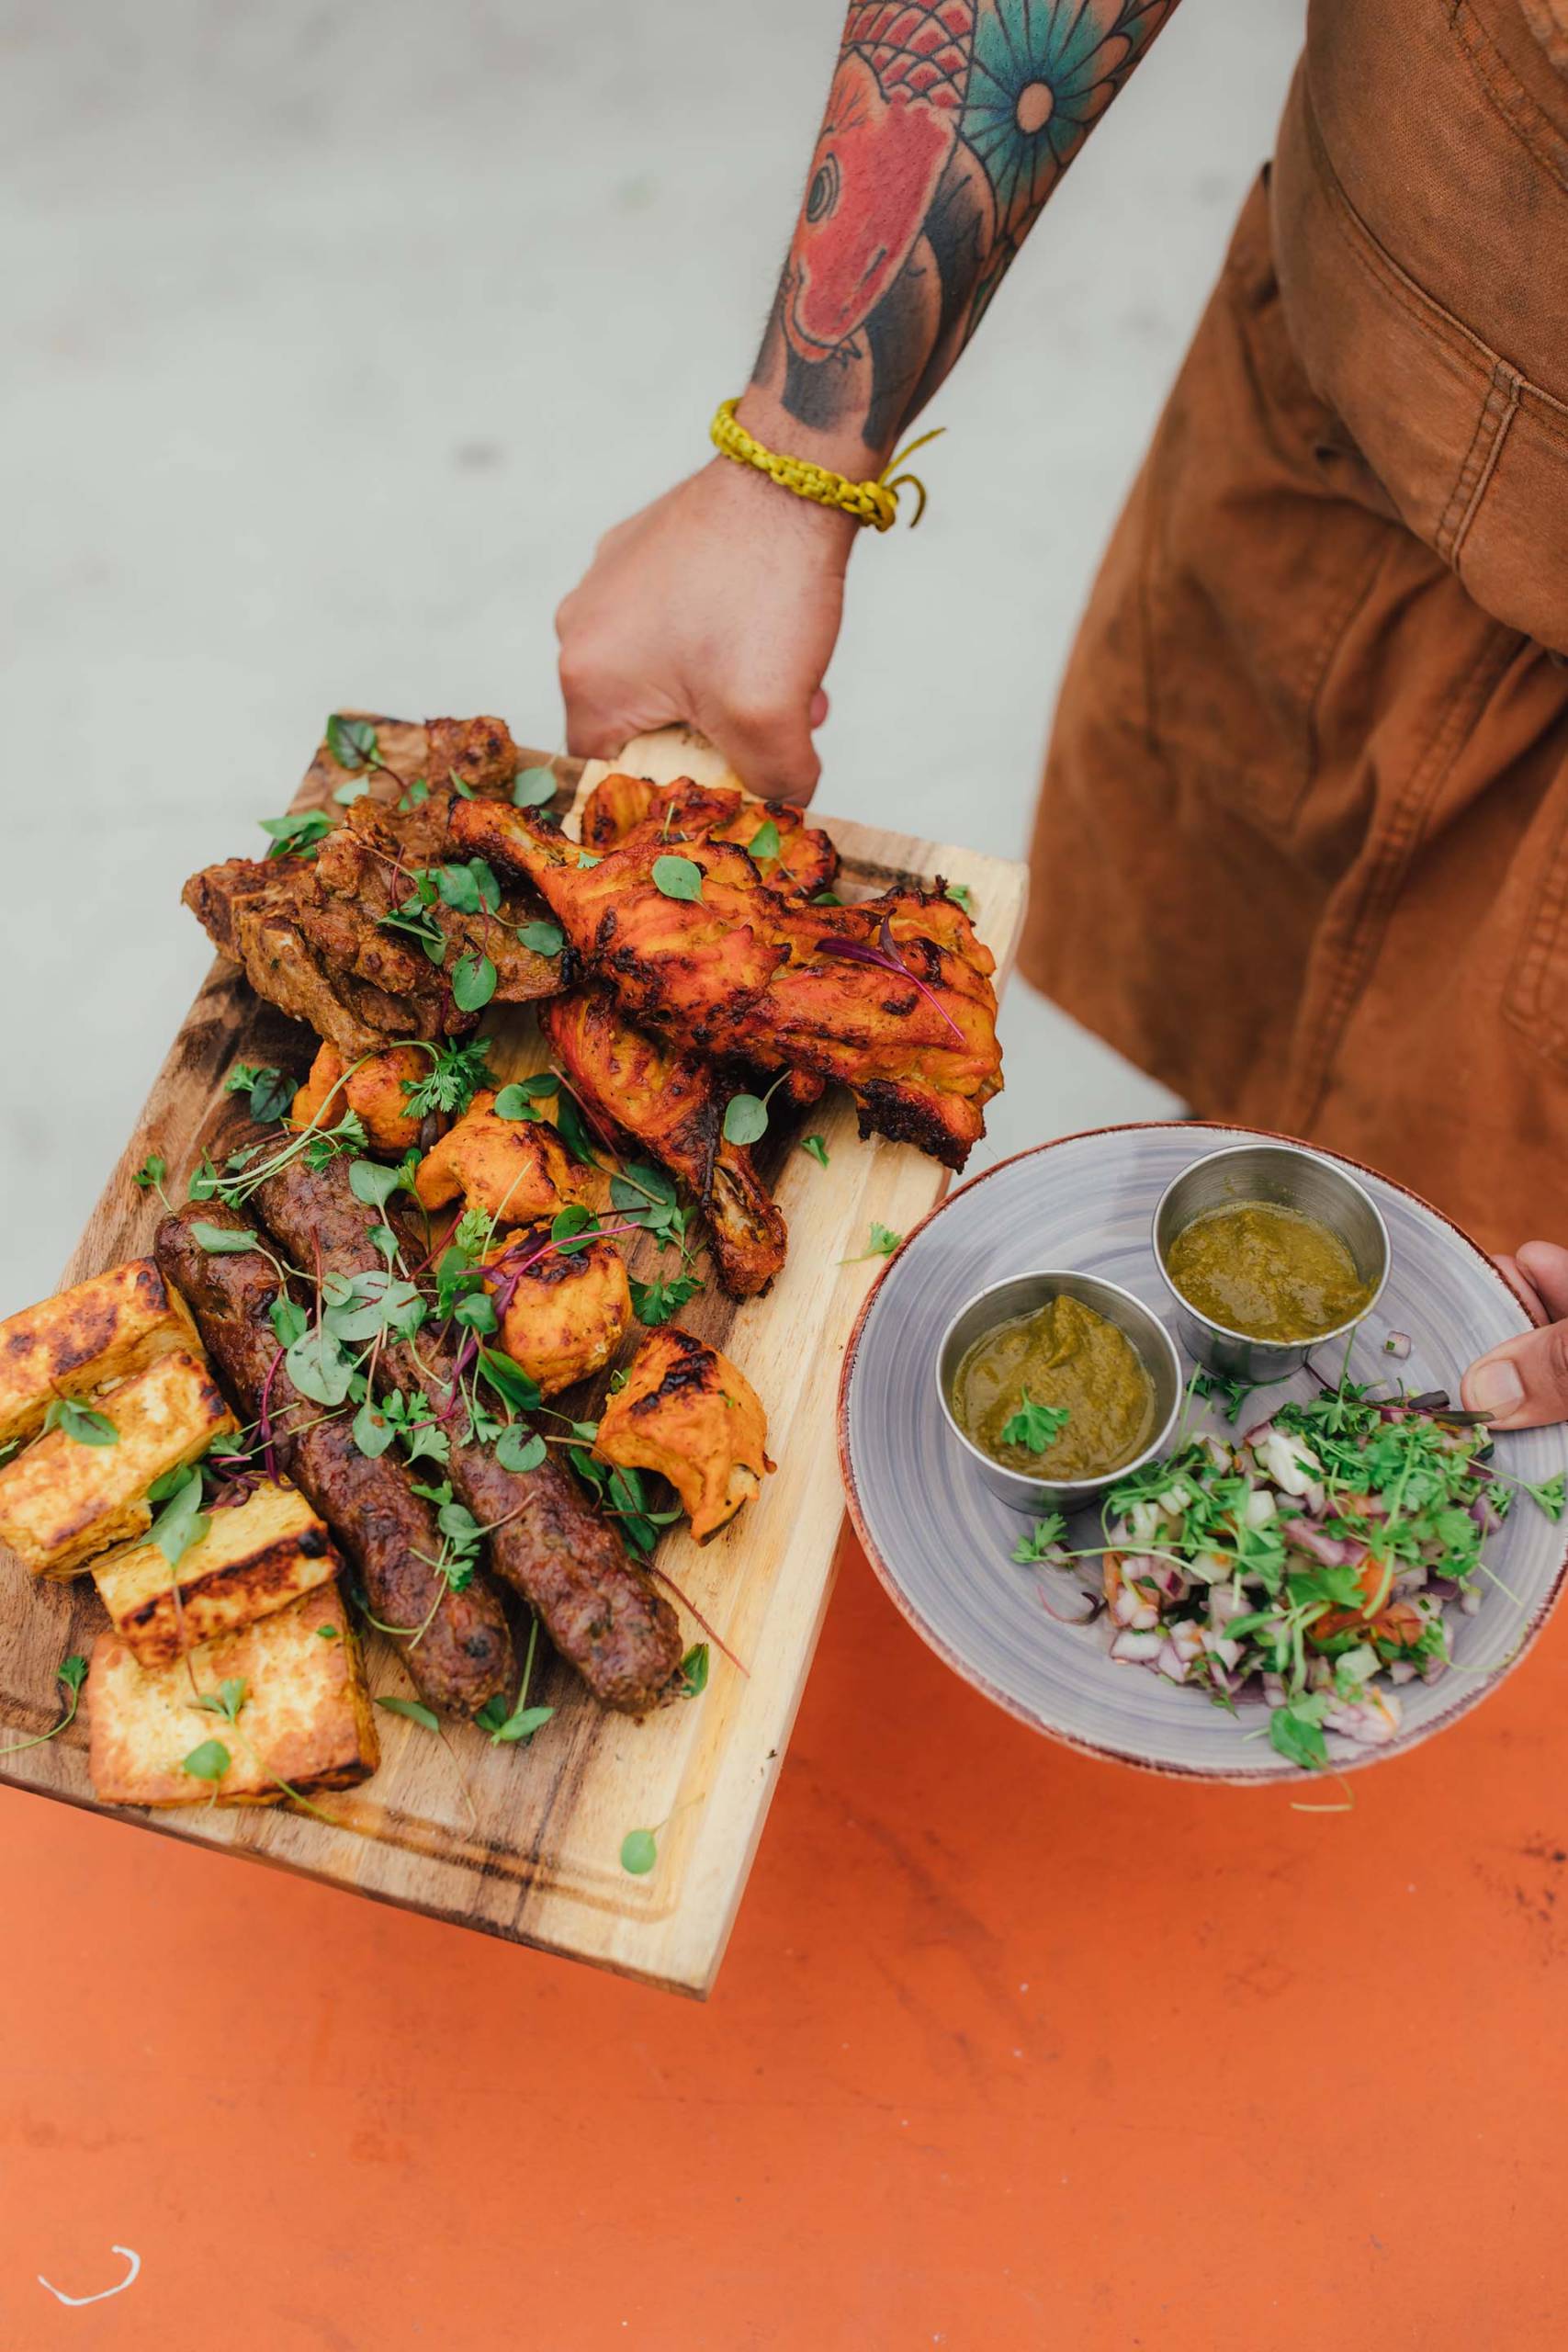 Indian kebabs on a wooden board, with a plate of chutneys on the side.